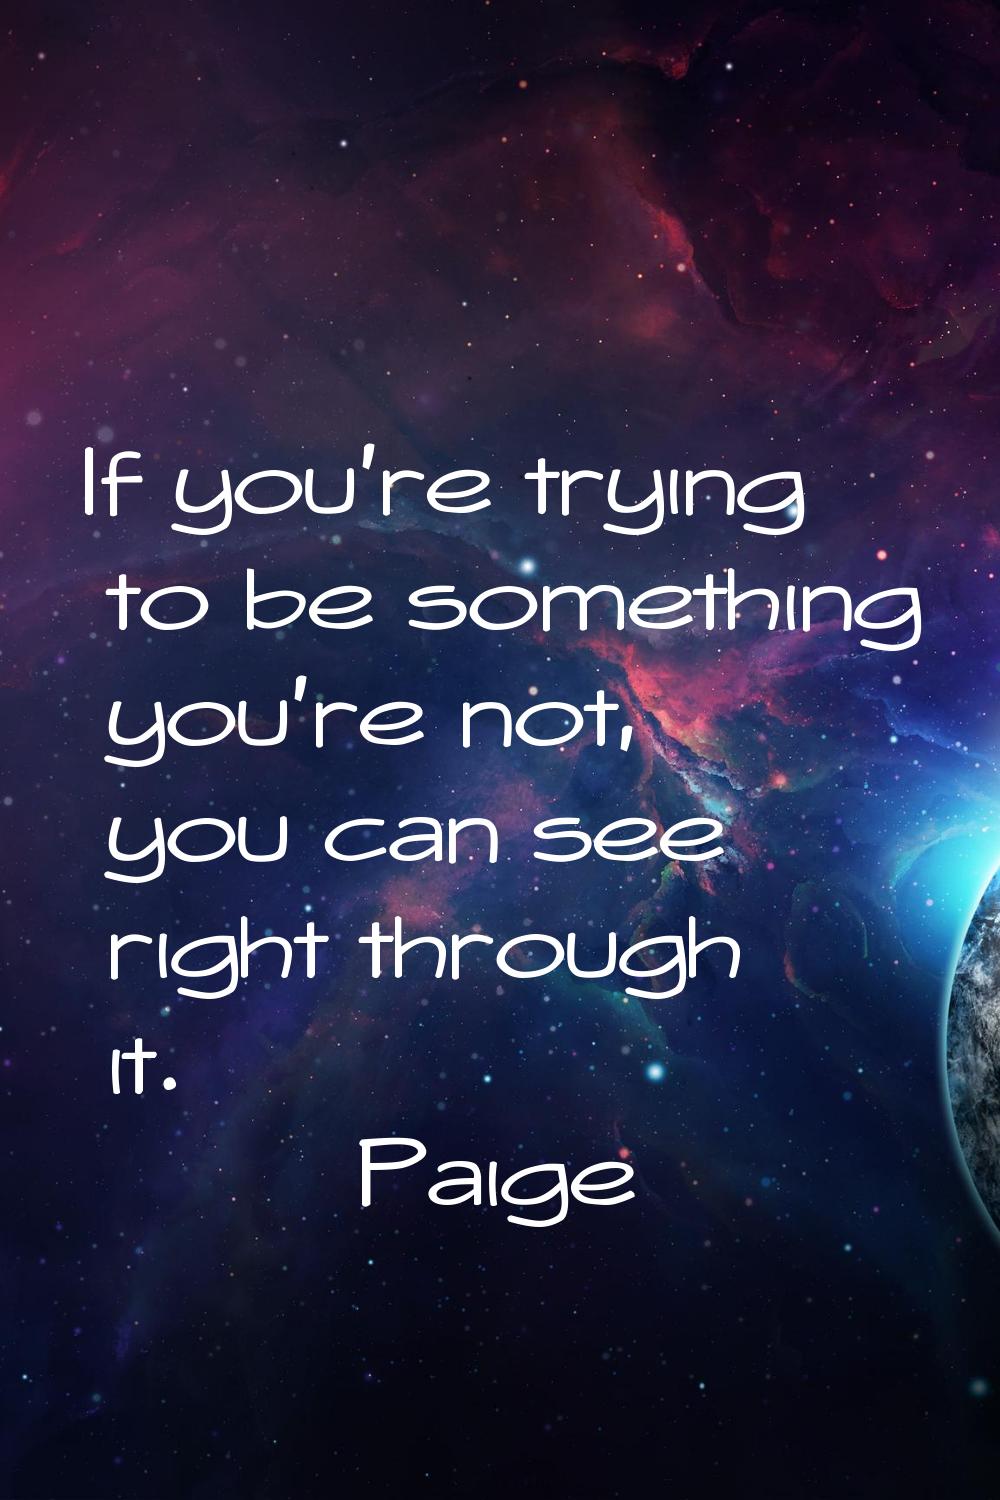 If you're trying to be something you're not, you can see right through it.